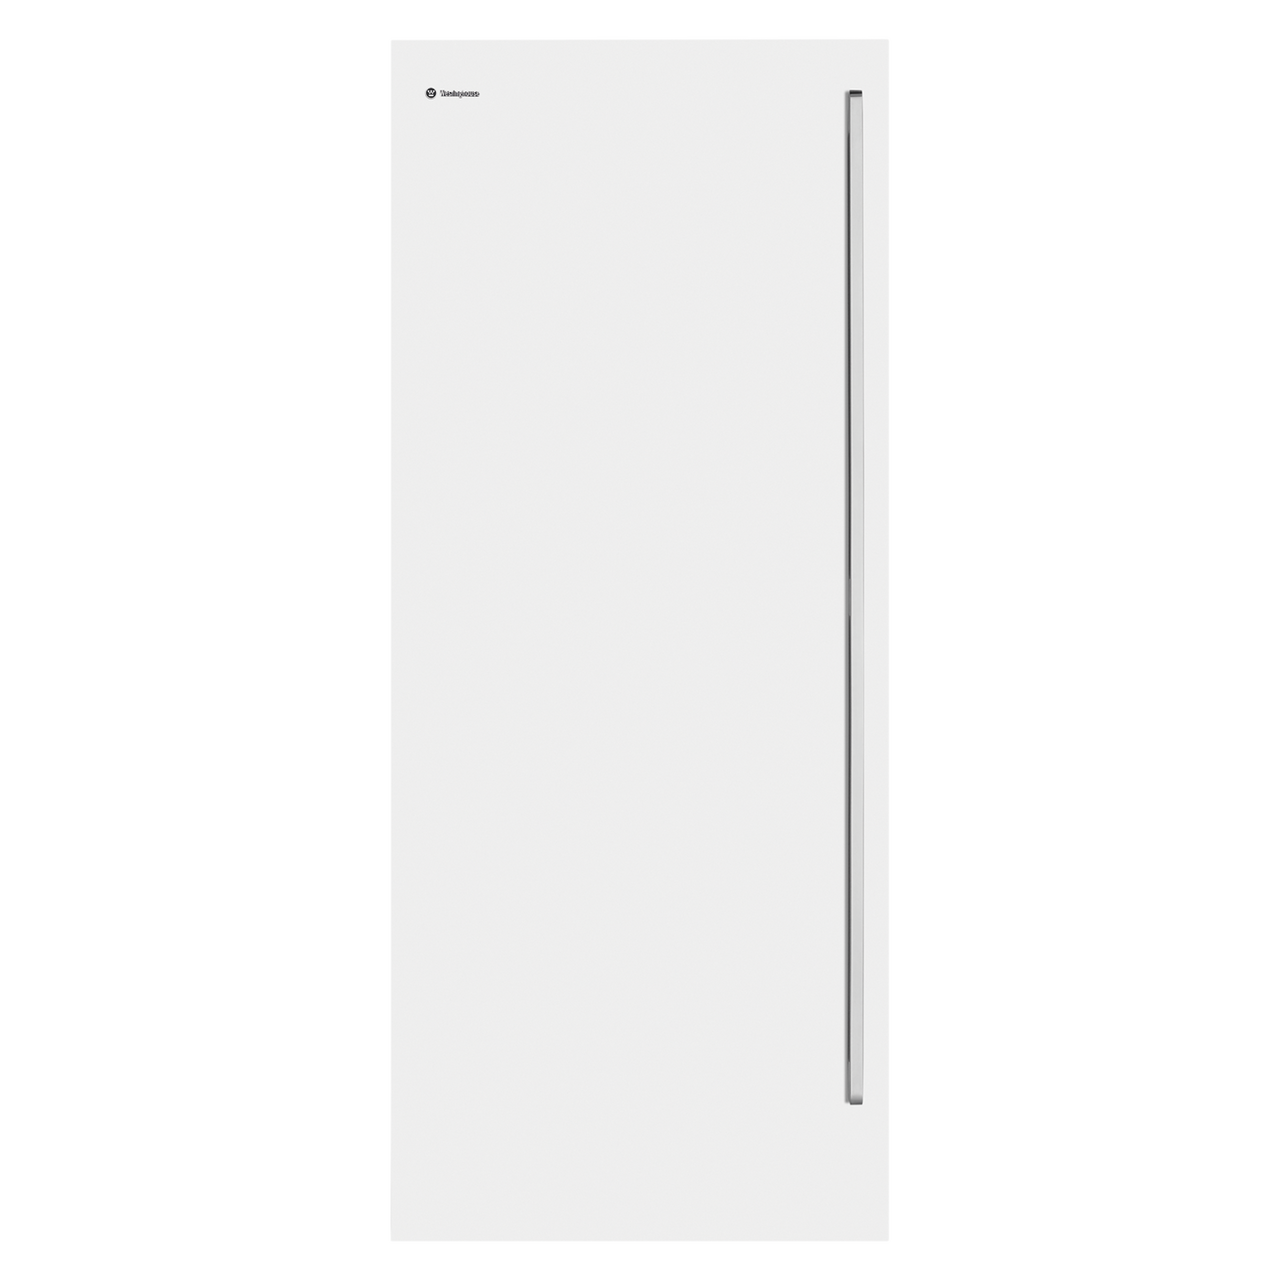 WFB4204WC - 425L Frost Free Vertical Freezer - Classic White, Left Hinge